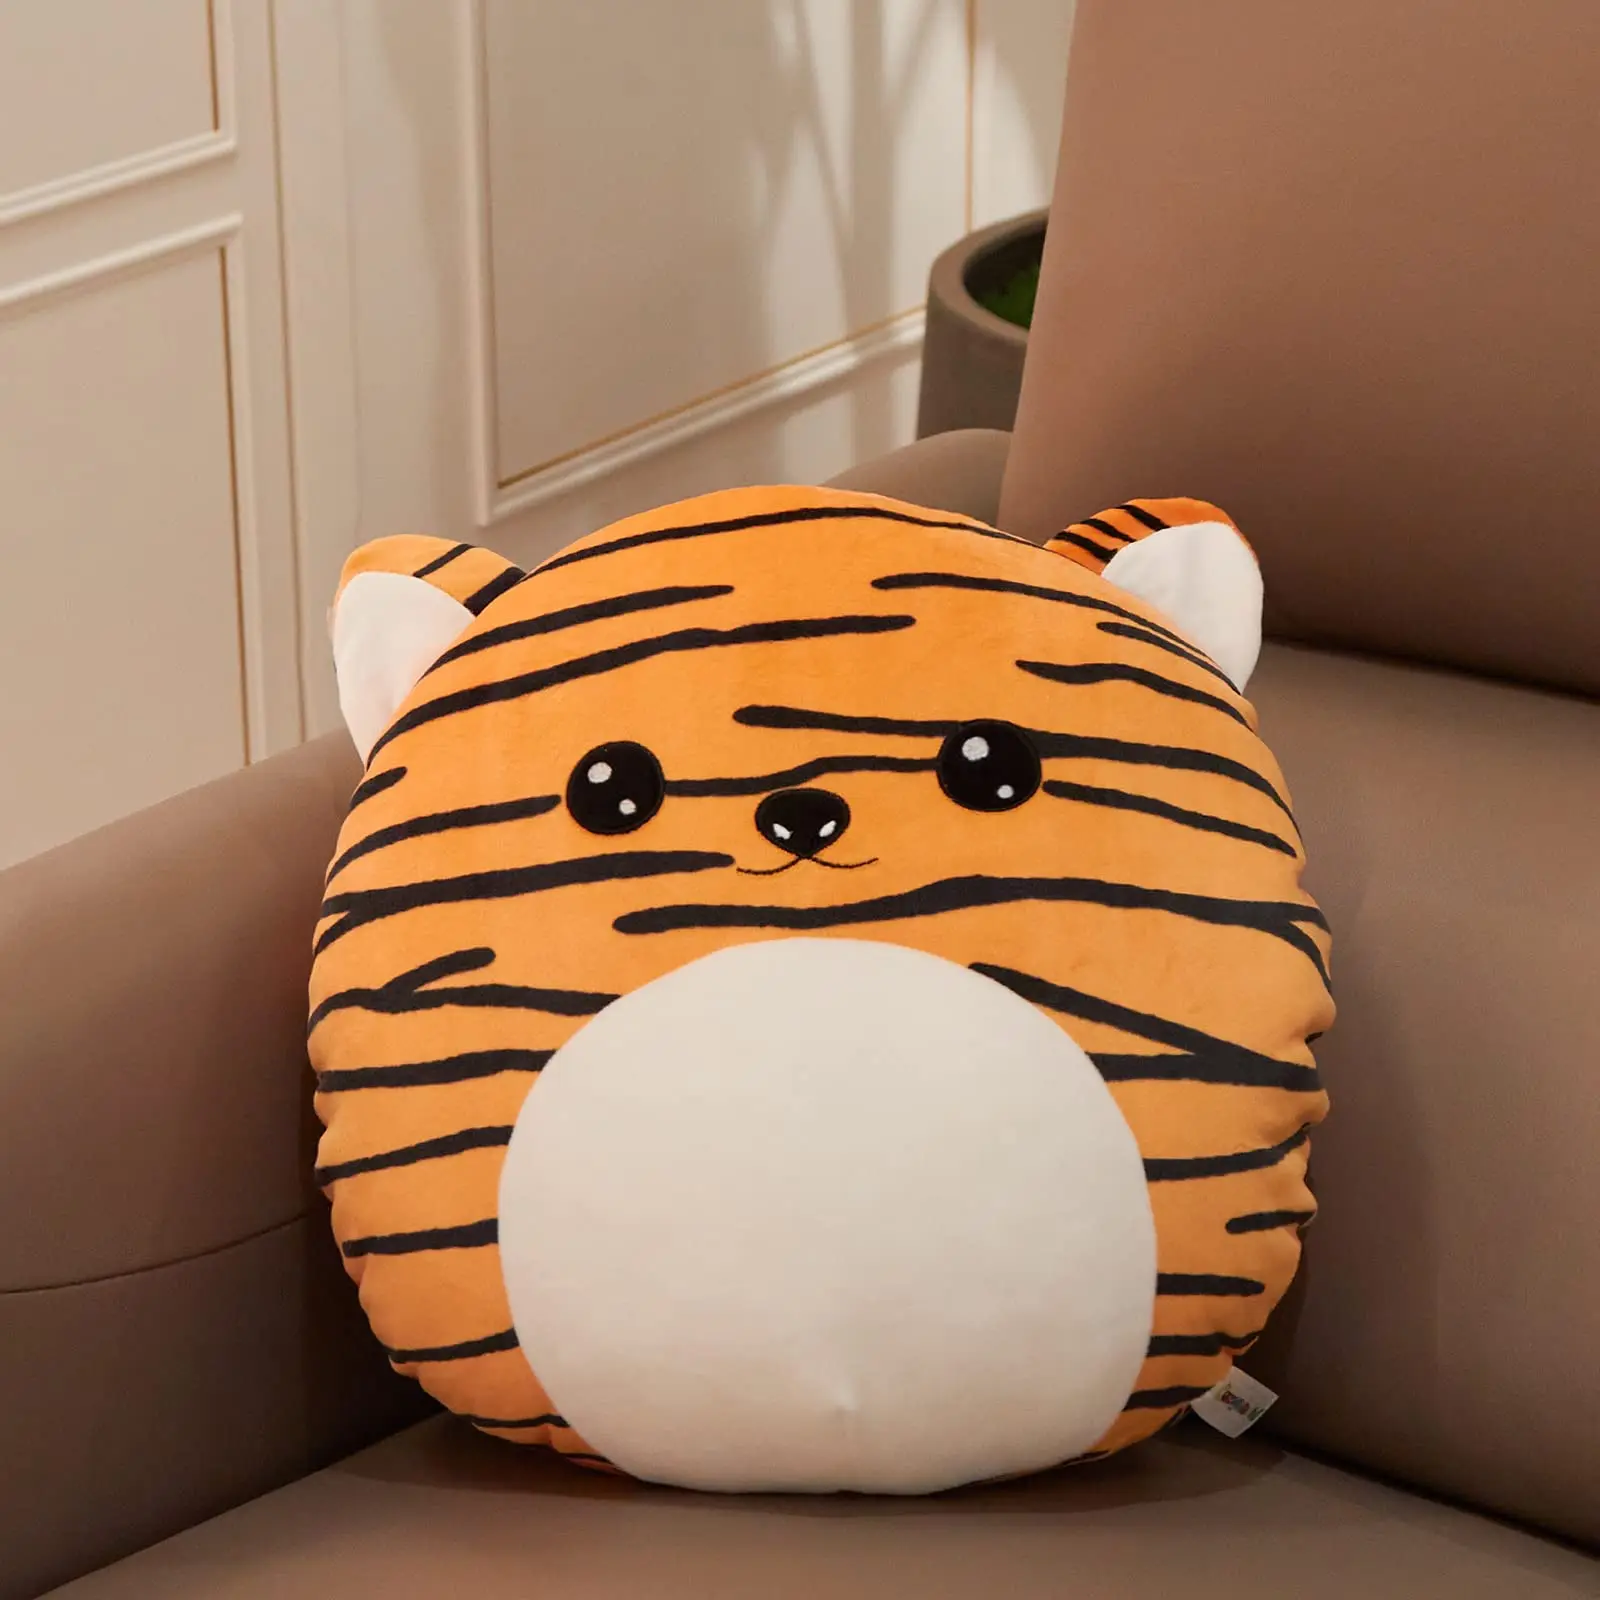 35cm Super Soft Yellow Tiger Throw Pillow Plush Toy Cute Easy to Clean Sleeping Toy Stuffed Animals for Girls Kids Children easy tiger шлейка для собак m